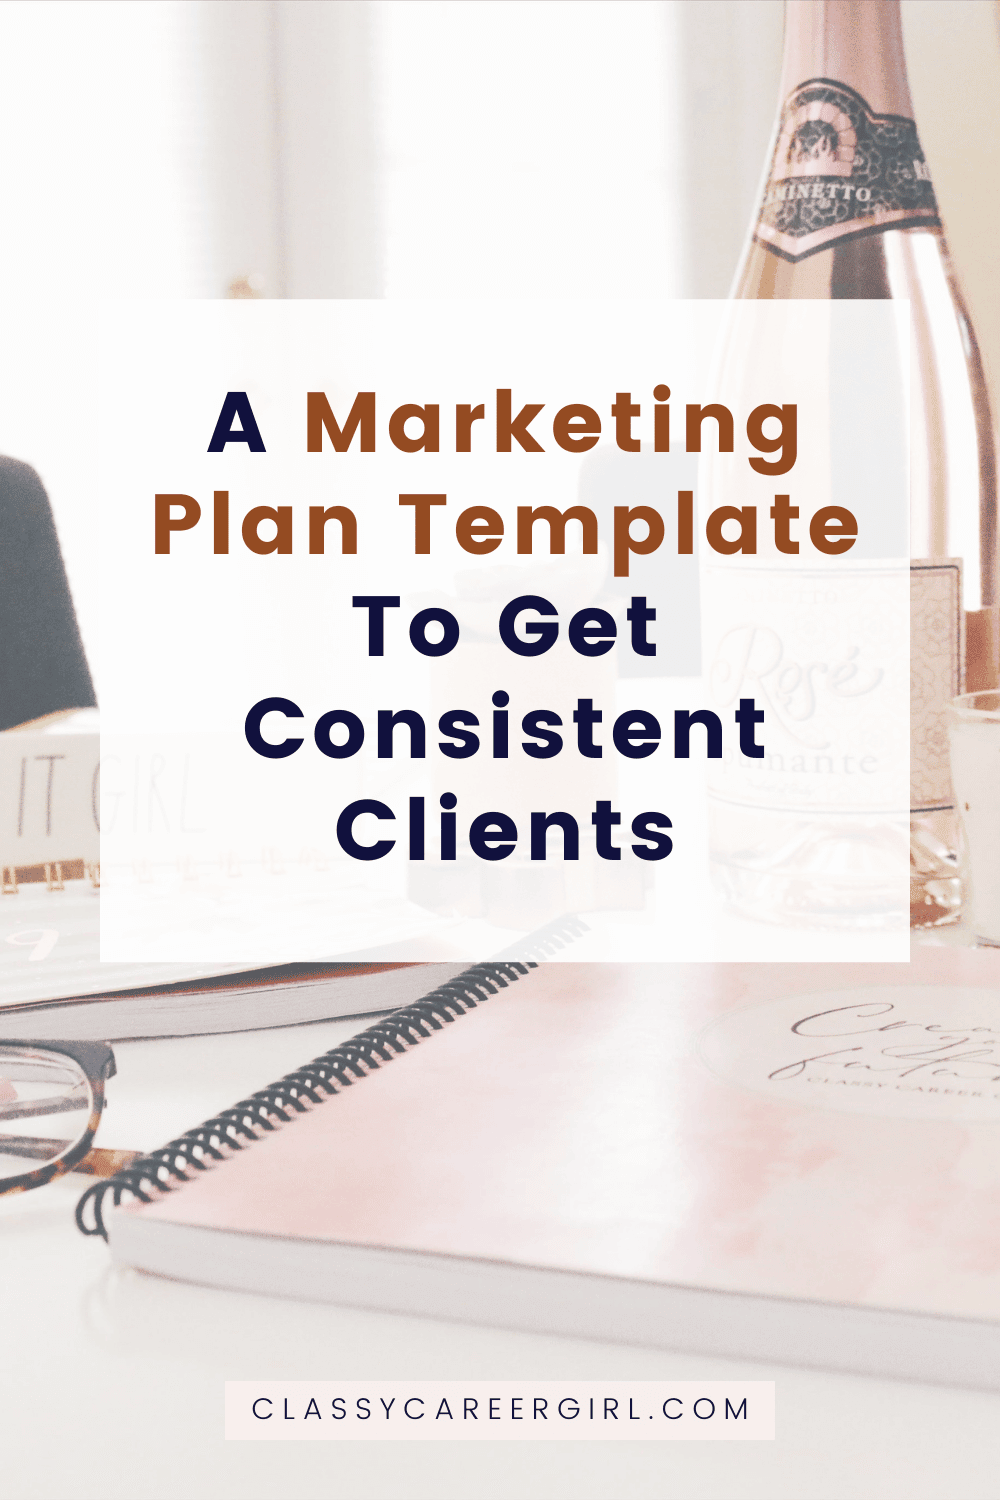 CCG Pin - A Marketing Plan Template To Get Consistent Clients